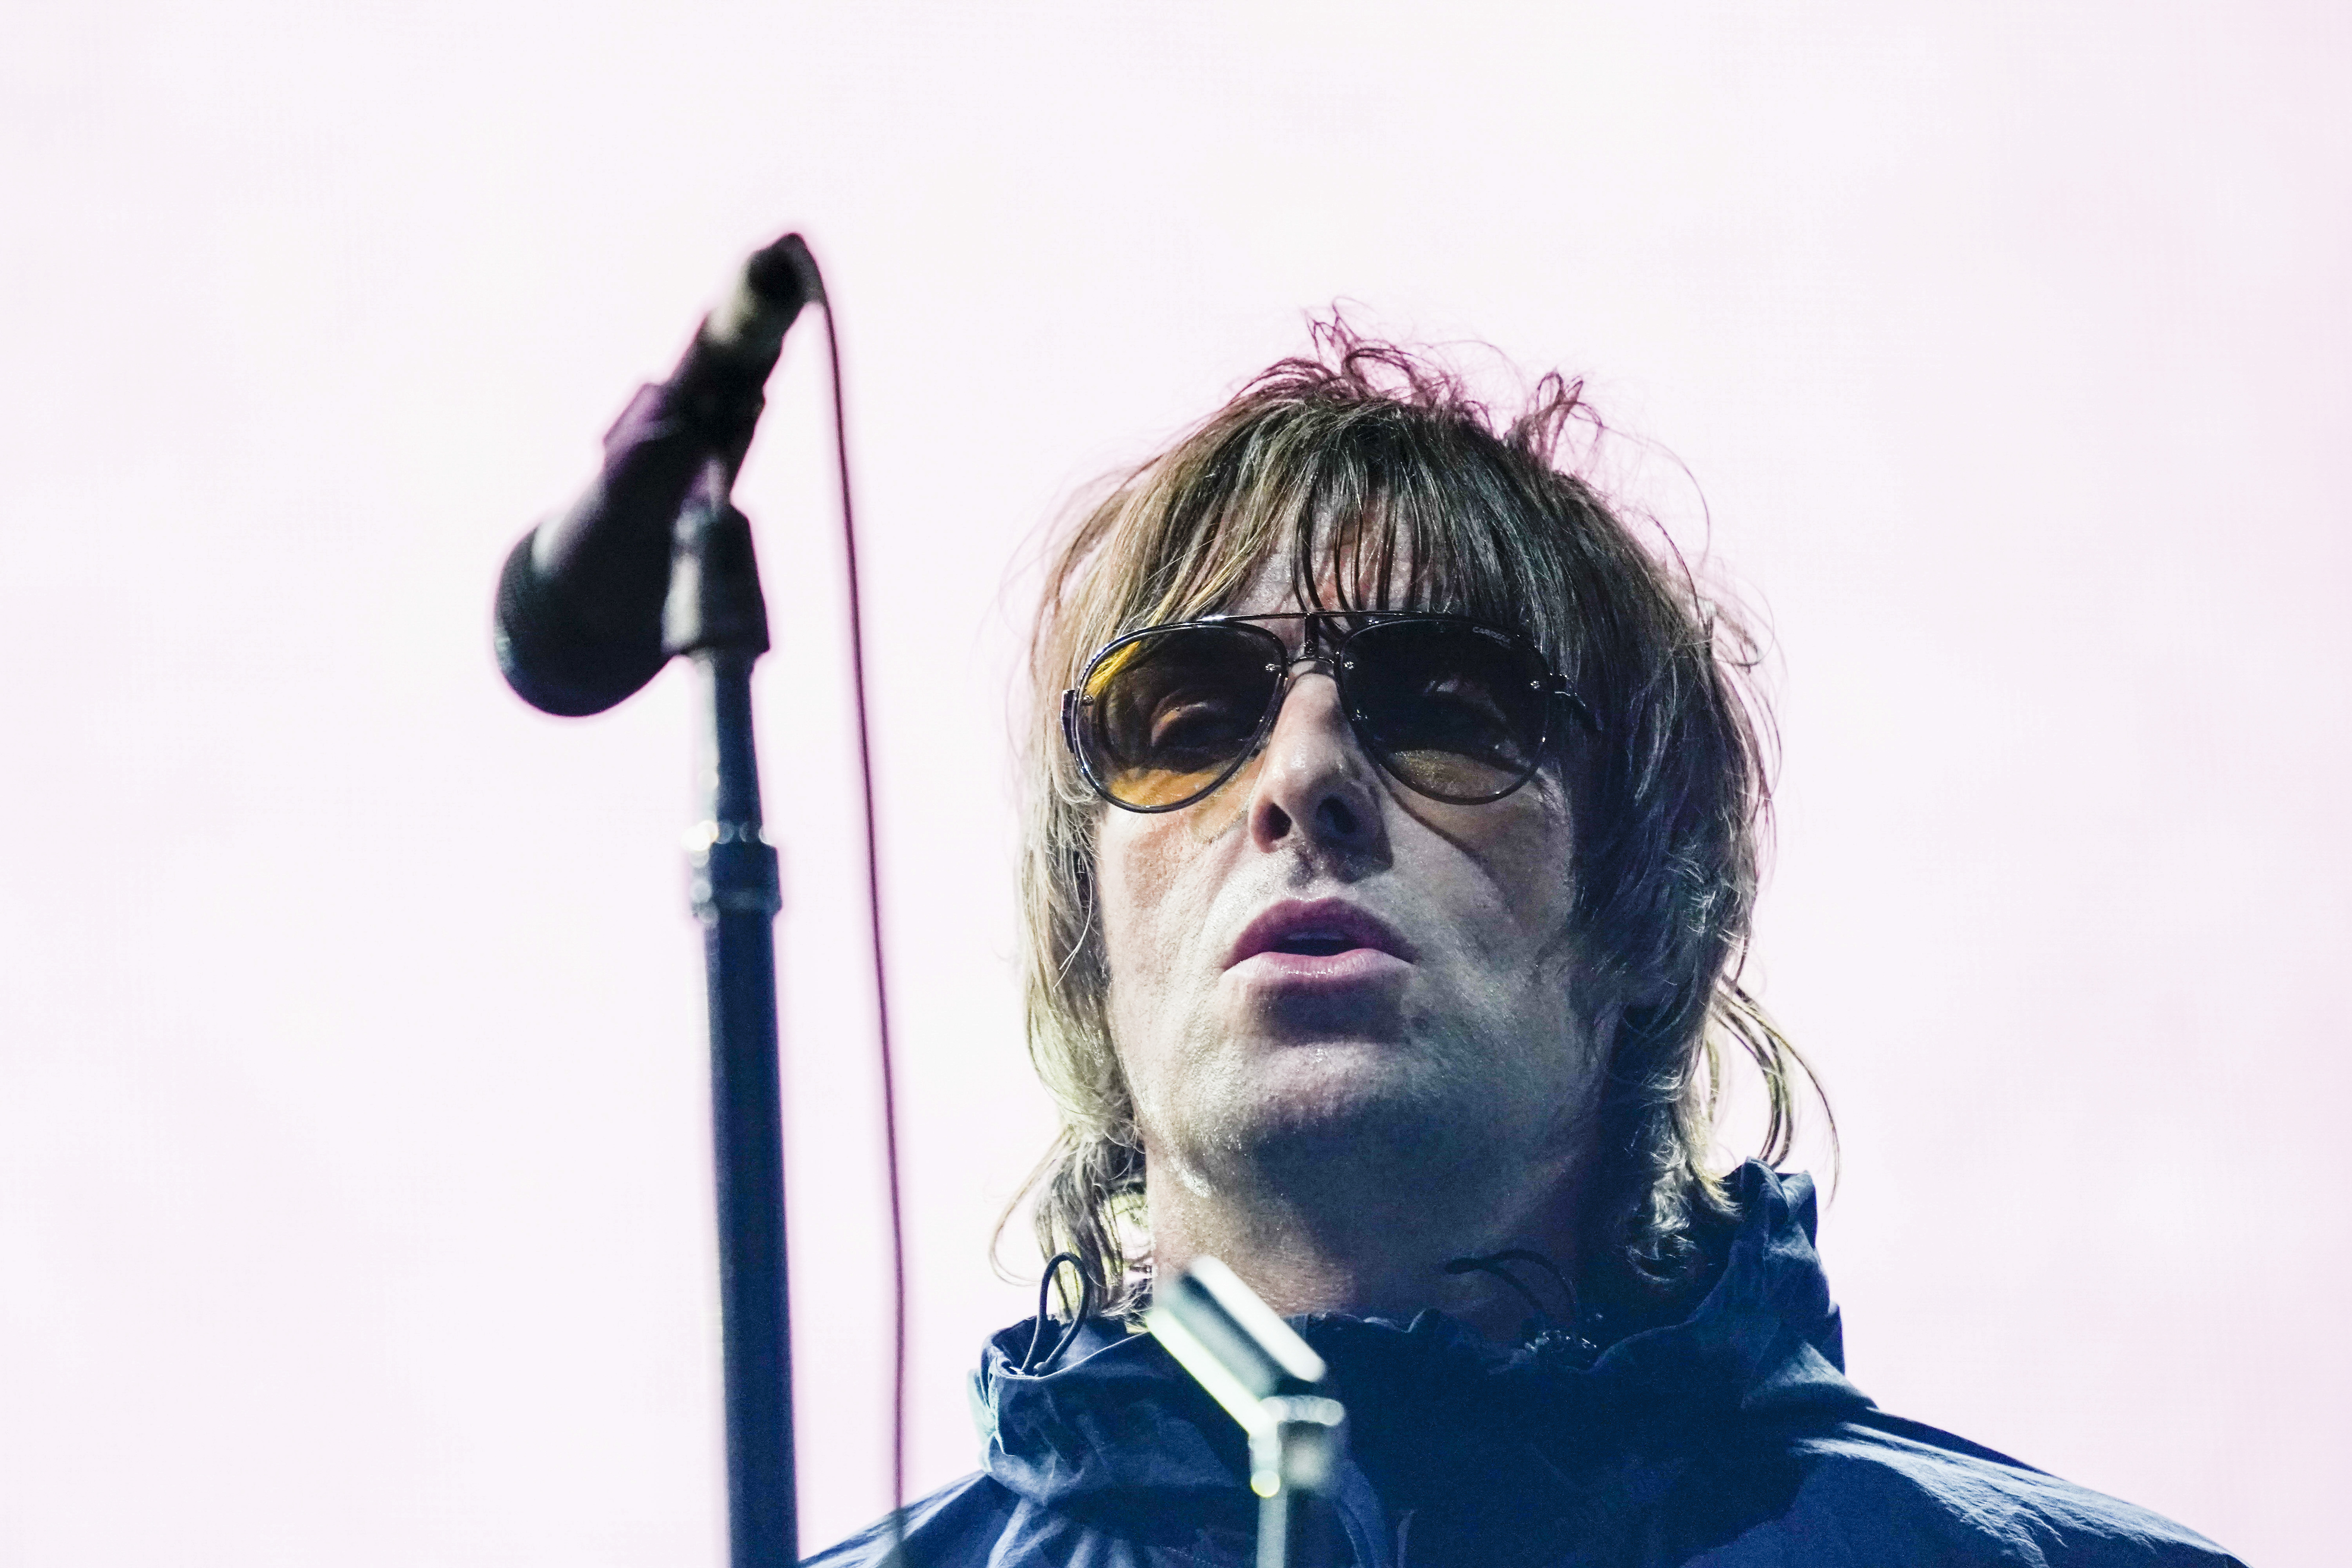 British singer Liam Gallagher performs on stage in London, Tuesday, Aug. 17, 2021, during a free concert attended by staff members of the British National Health Service. (AP Photo/Alberto Pezzali)